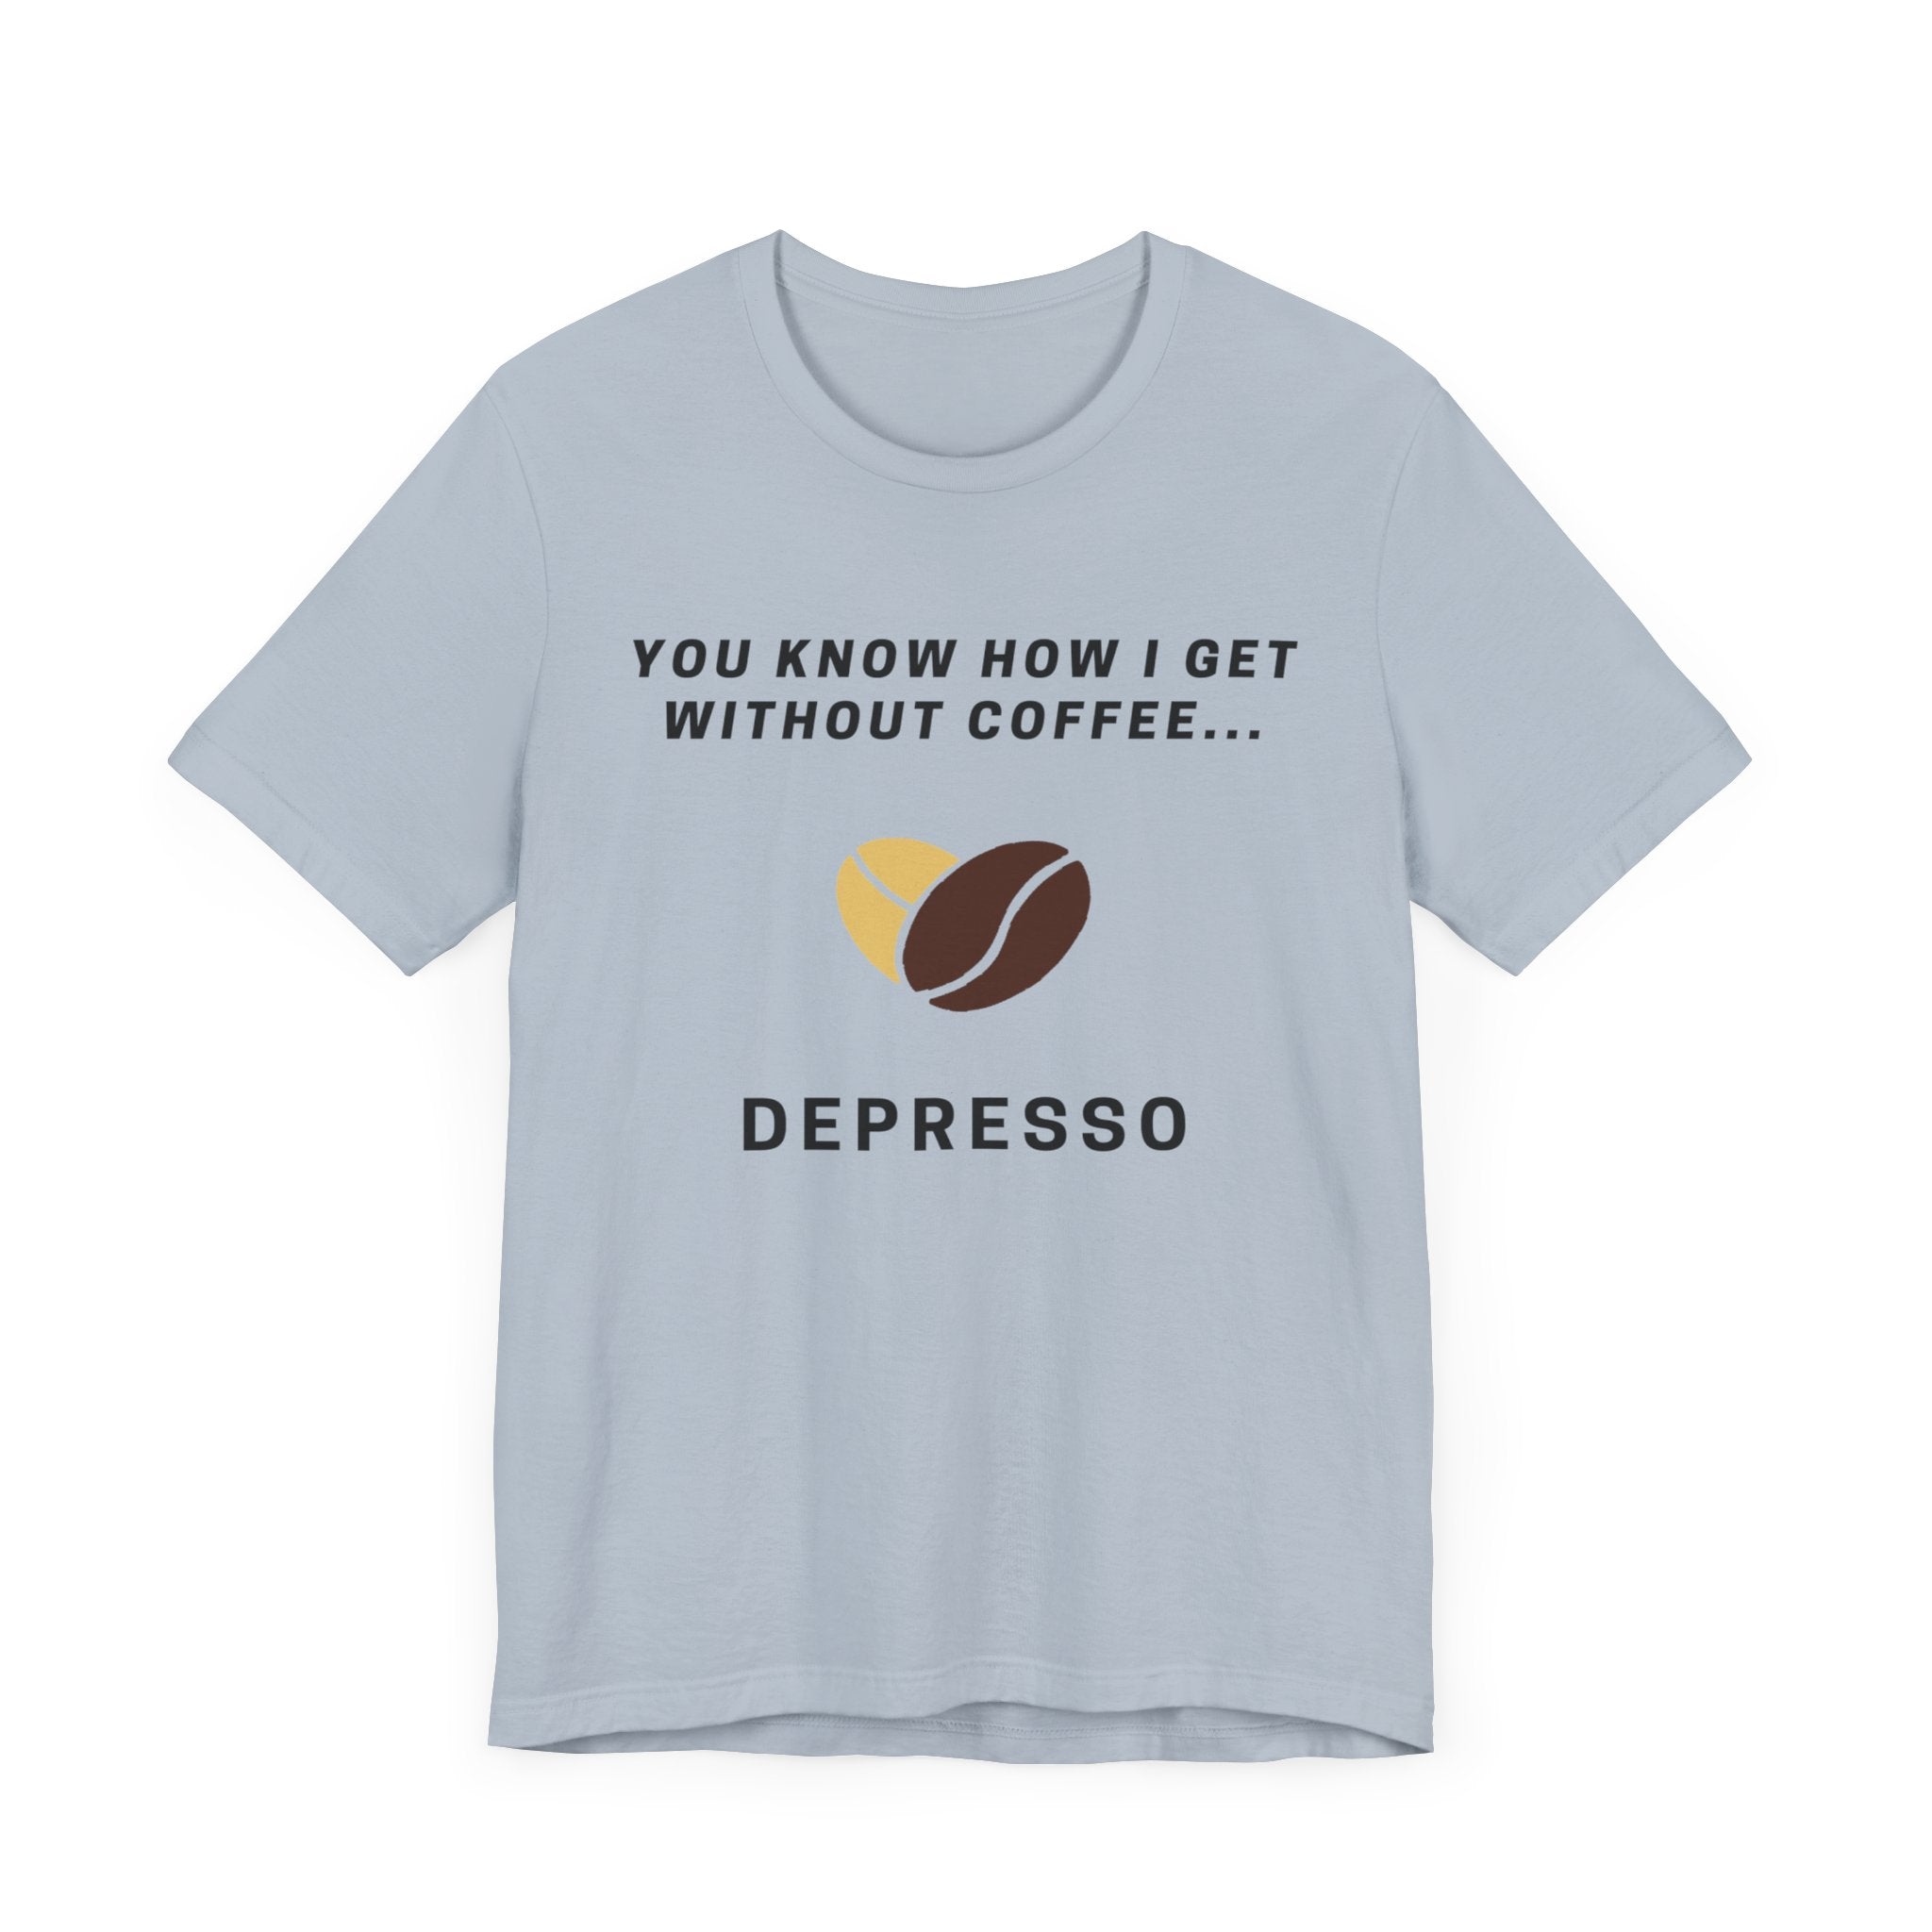 Depresso T-Shirt [FOR People Who Get Depresso Without Espresso]